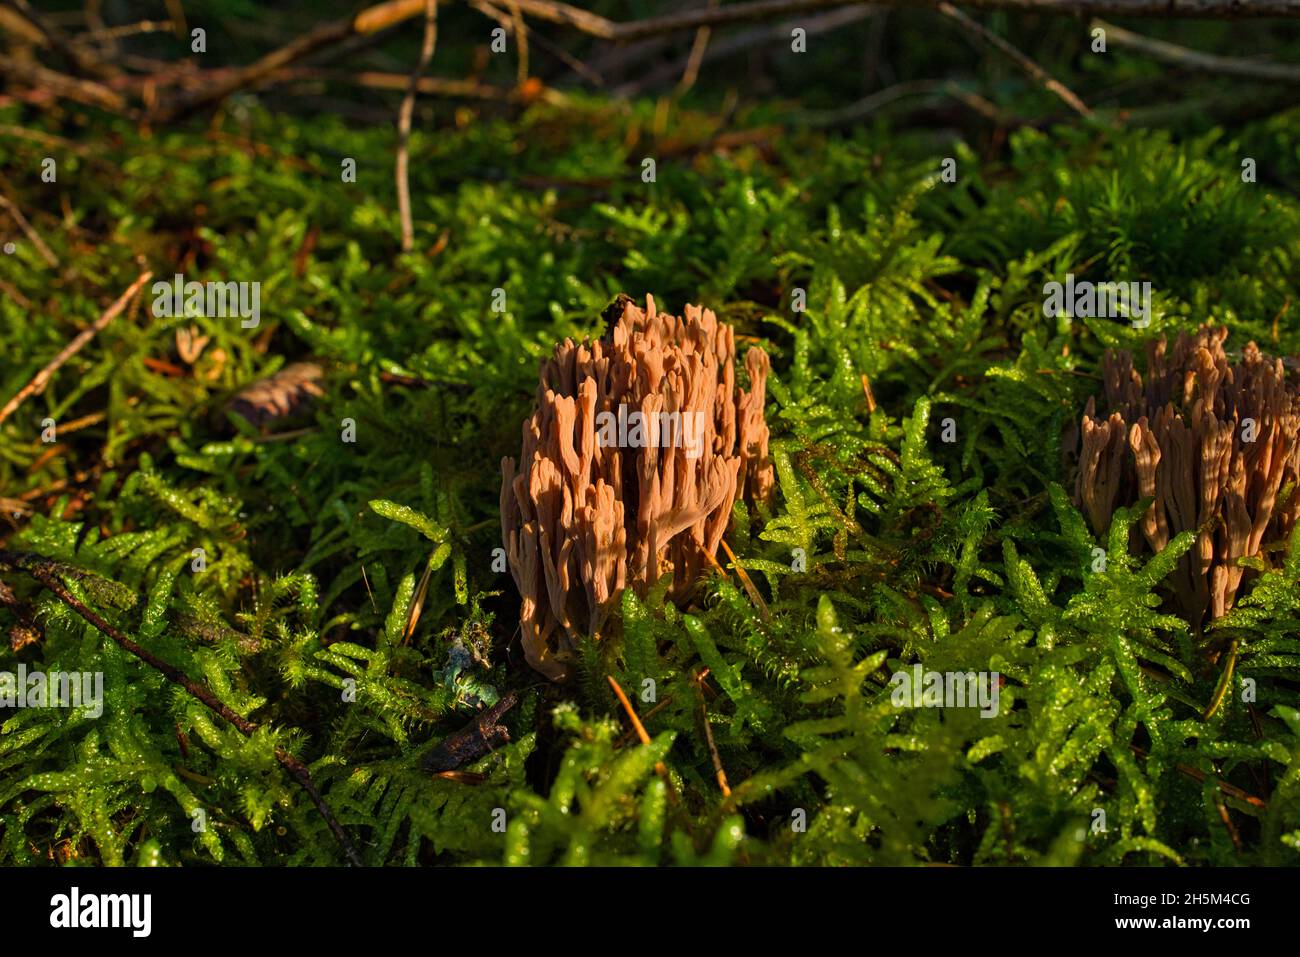 Coral mushroom called Ramaria formosa close-up, beautiful forest background Stock Photo